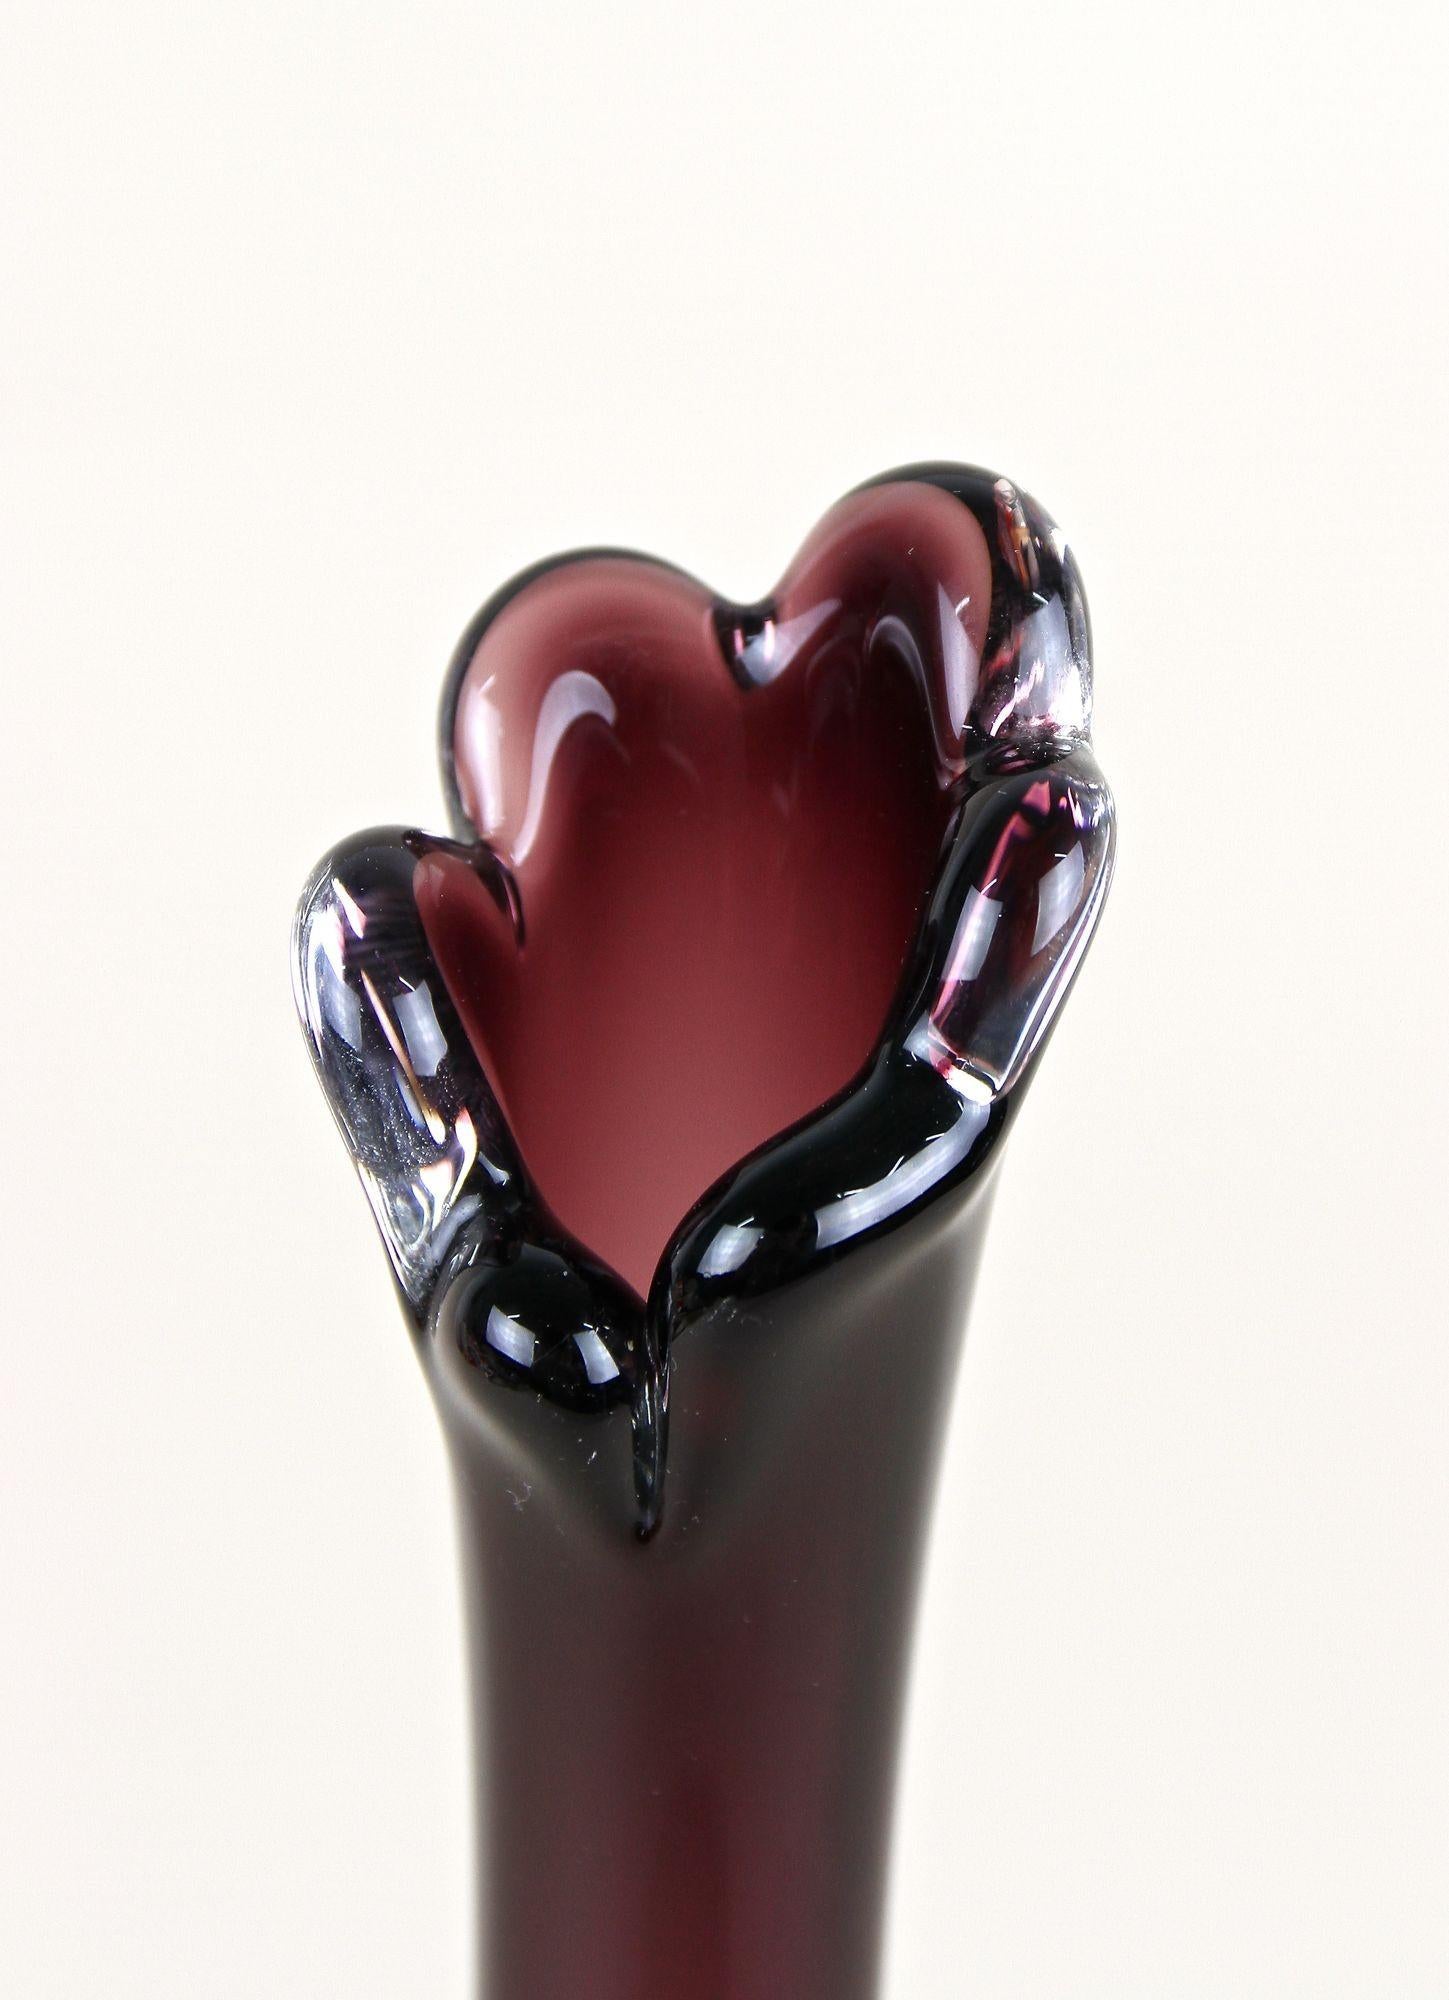 Elegant, bordeaux red Murano glass vase coming from the famous workshops of the little island in Venice. Artfully handcrafted in the late 20th Century around 1970, this beautiful Murano vase impresses with an absolute timeless design: a bulbous,